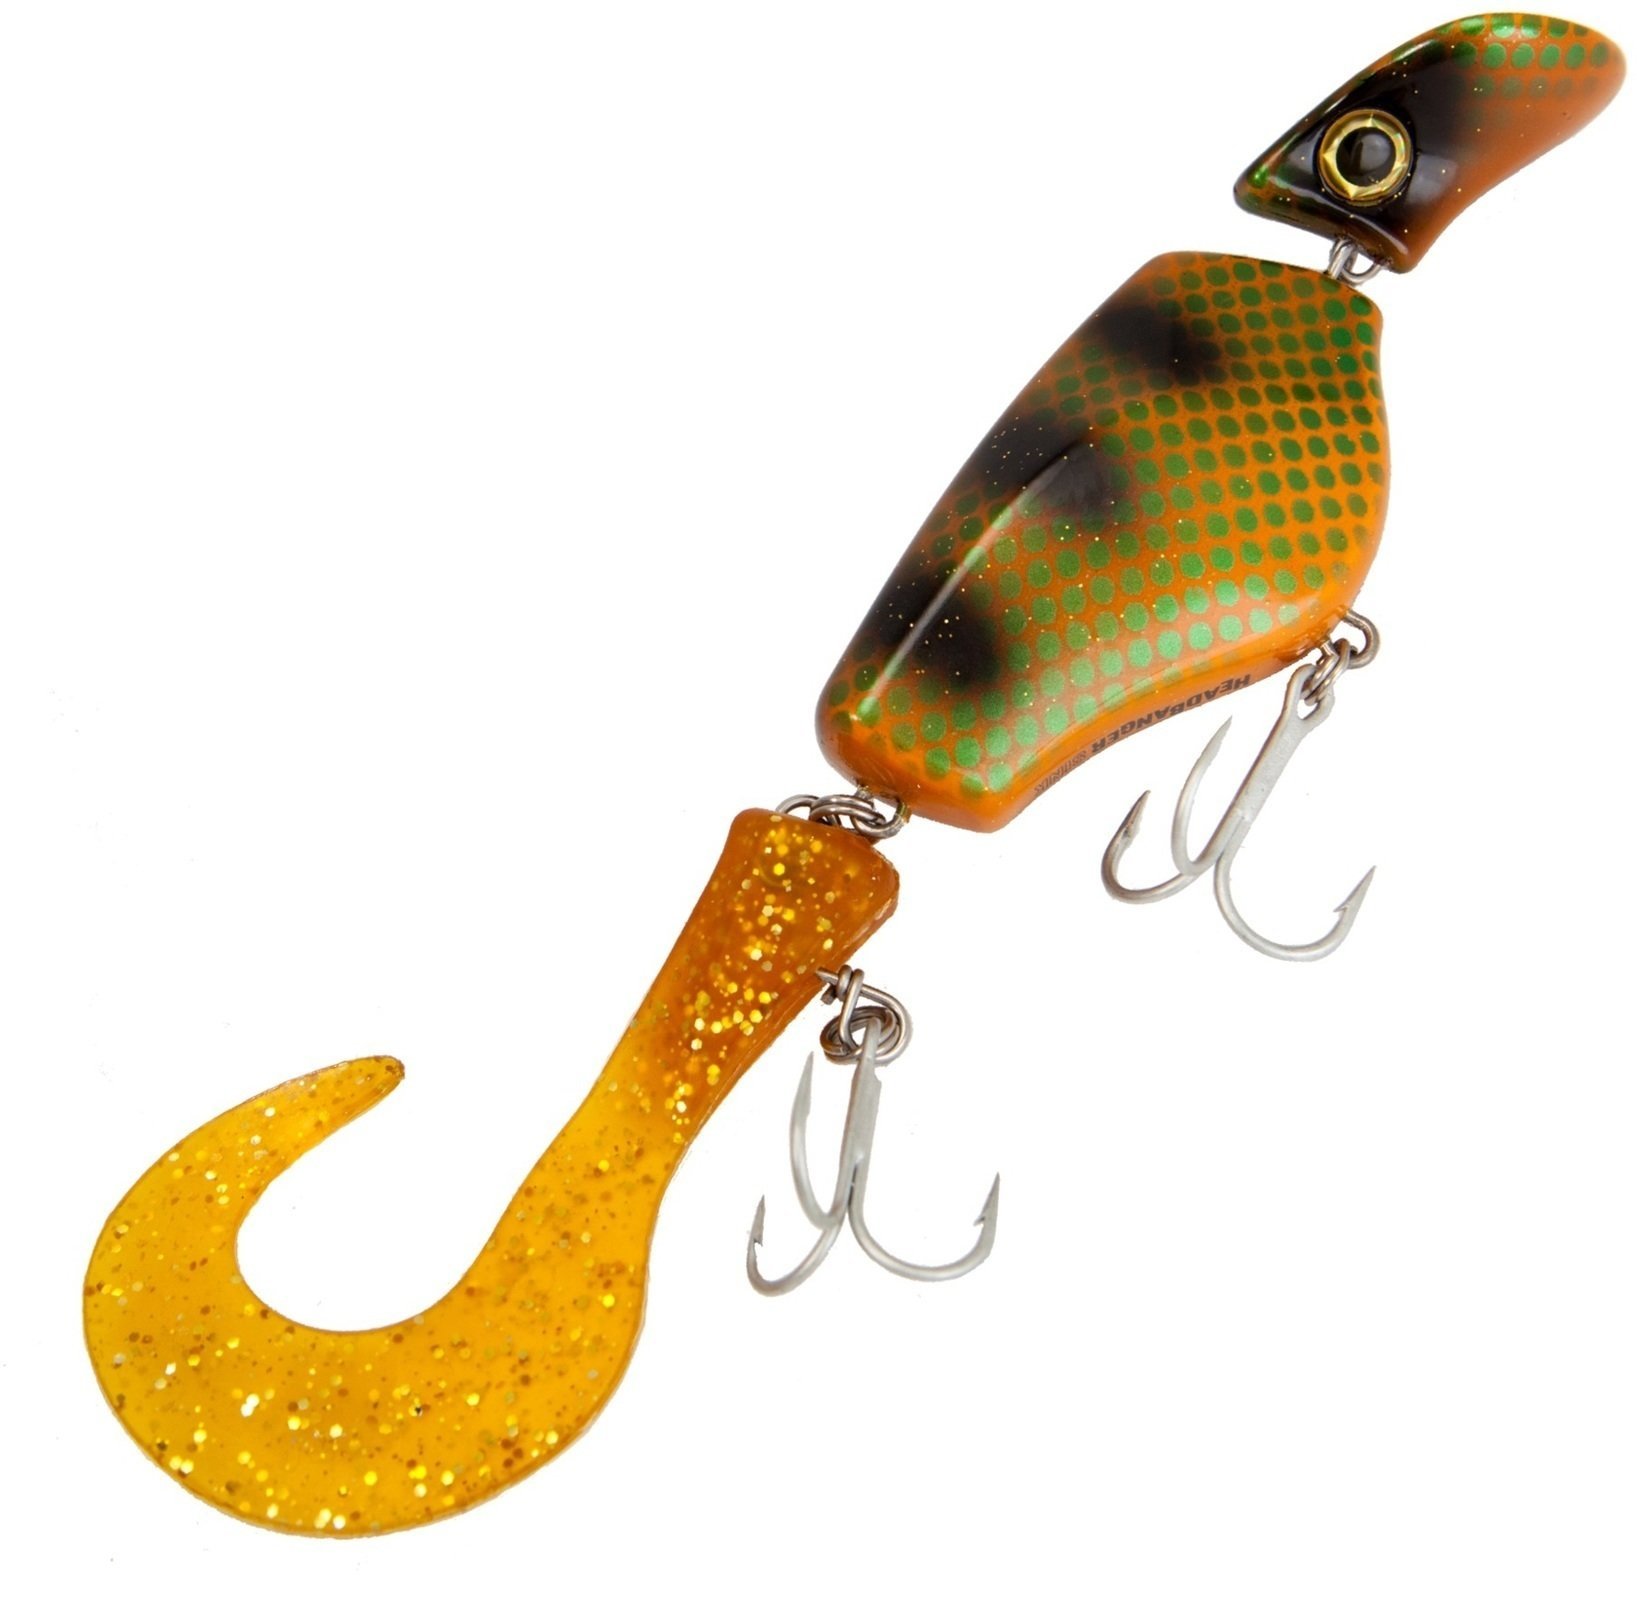 Esca artificiale Headbanger Lures Tail Floating Rusty Perch 23 cm 48 g